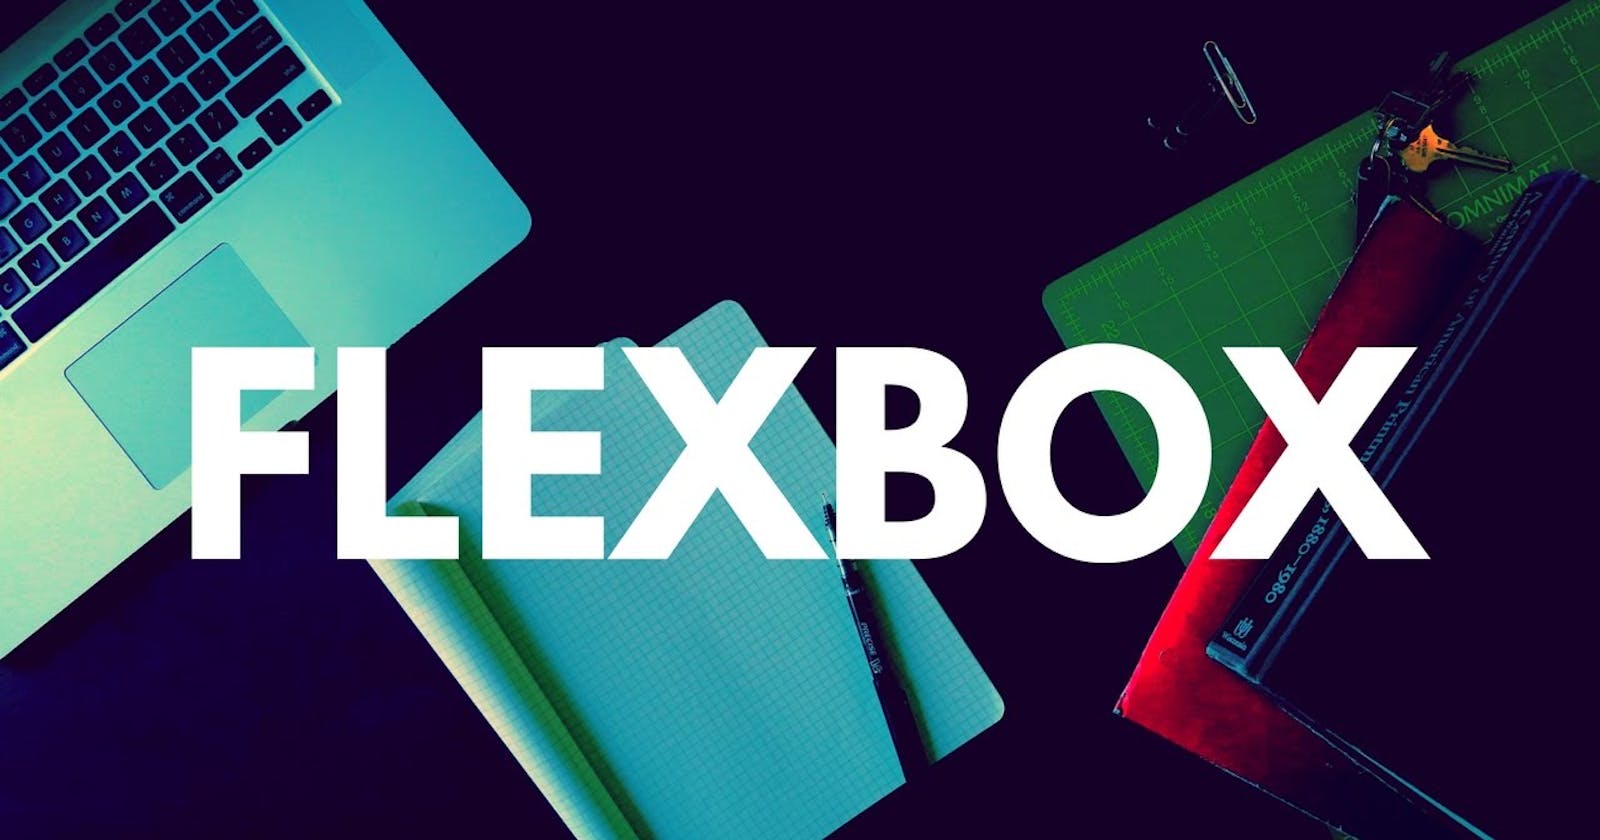 CSS Flex Box - The BEST Way To Design Your Layout